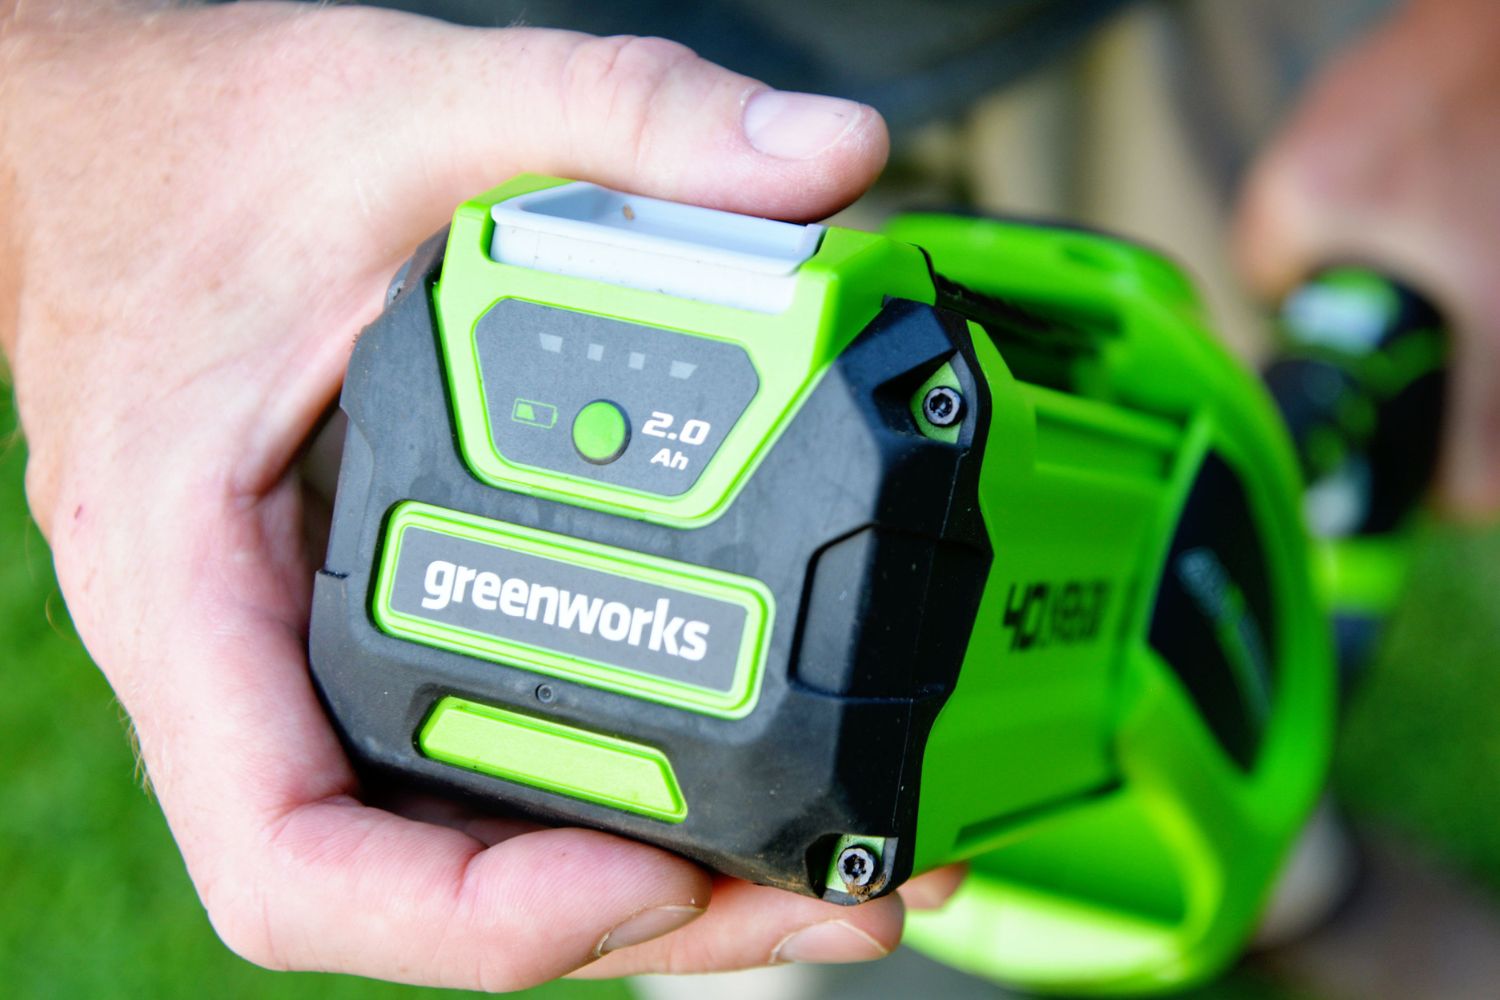 A close-up of the battery on the Greenworks 40V cordless pole saw